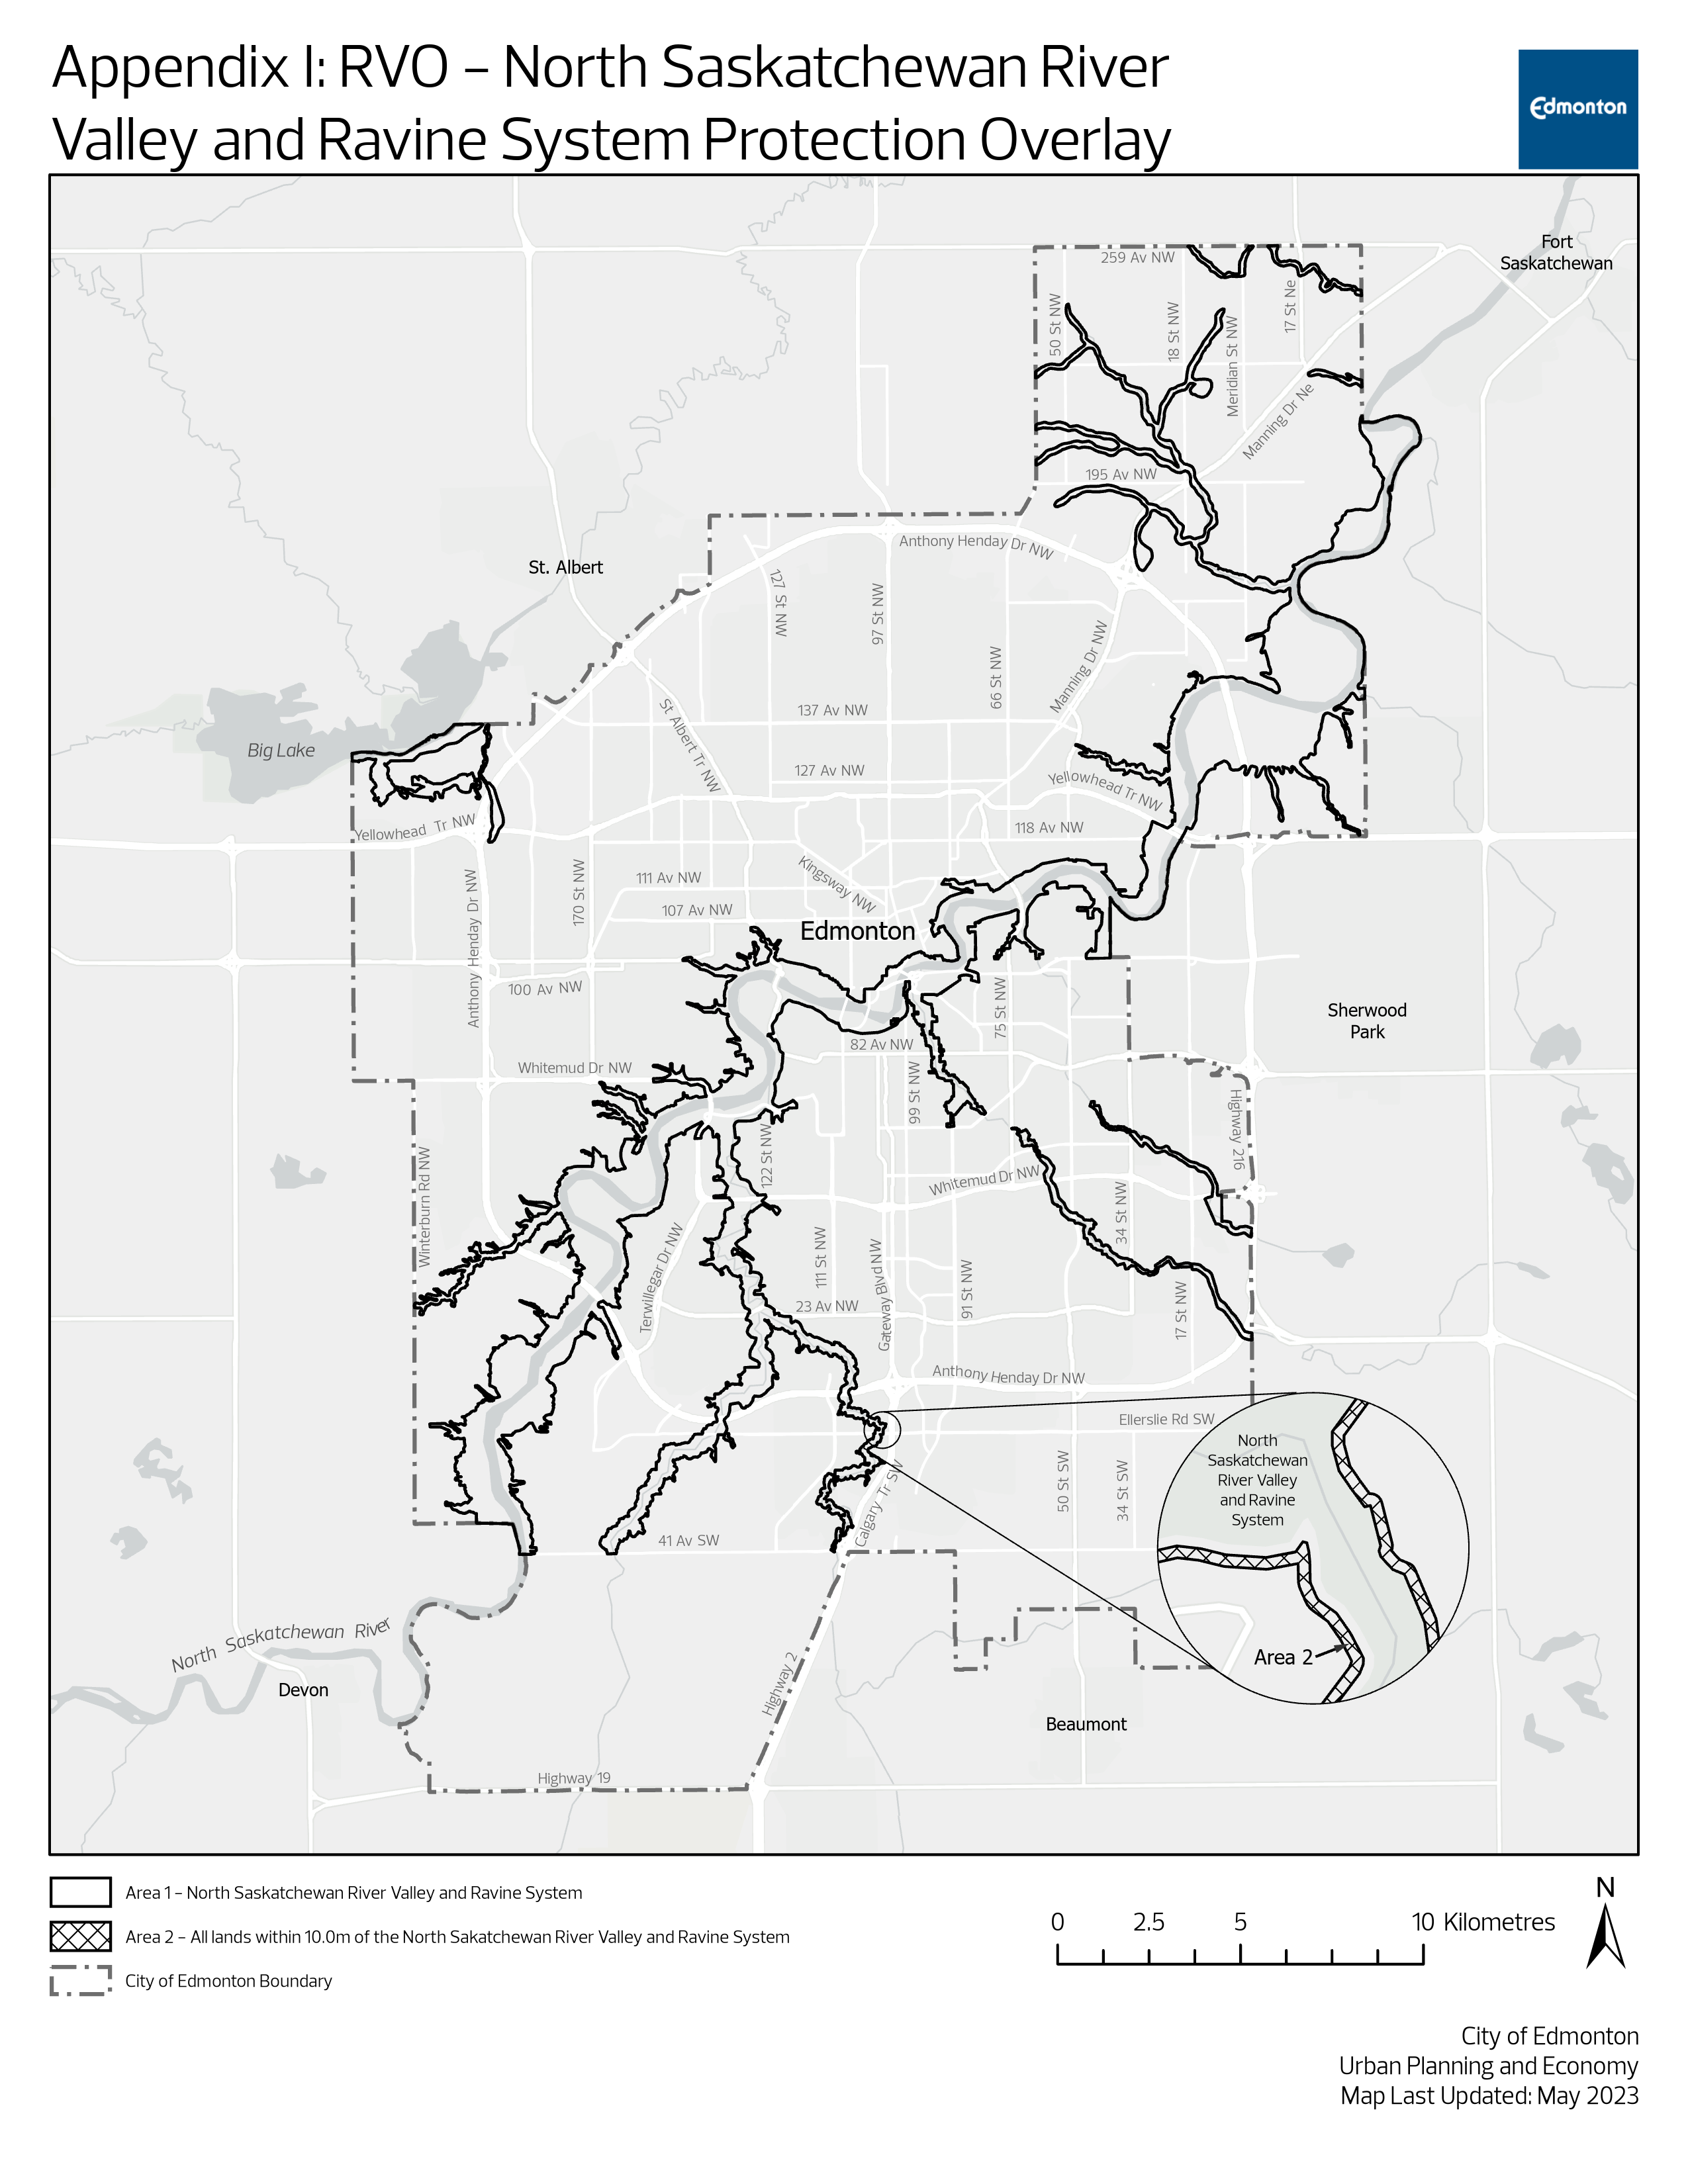 North Saskatchewan River Valley and Ravine System Protection Overlay map